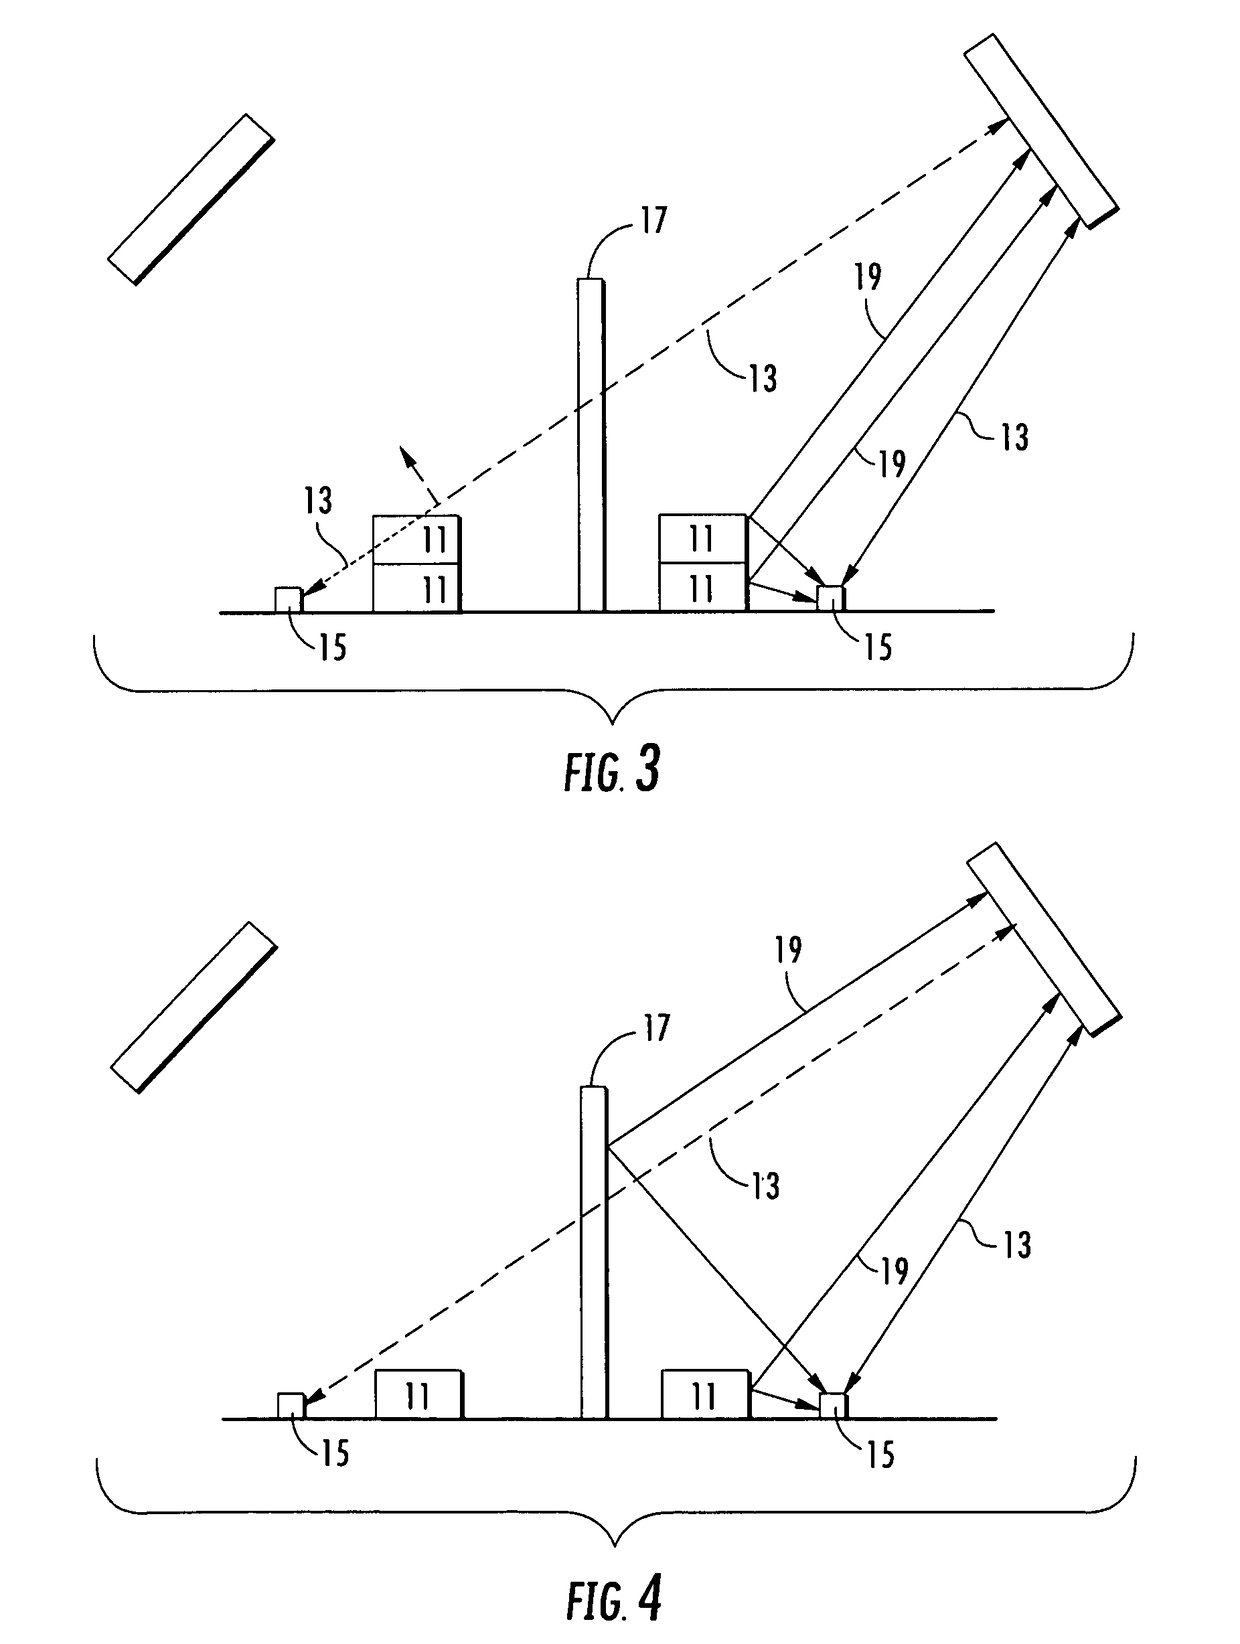 Radio frequency environment object monitoring system and methods of use